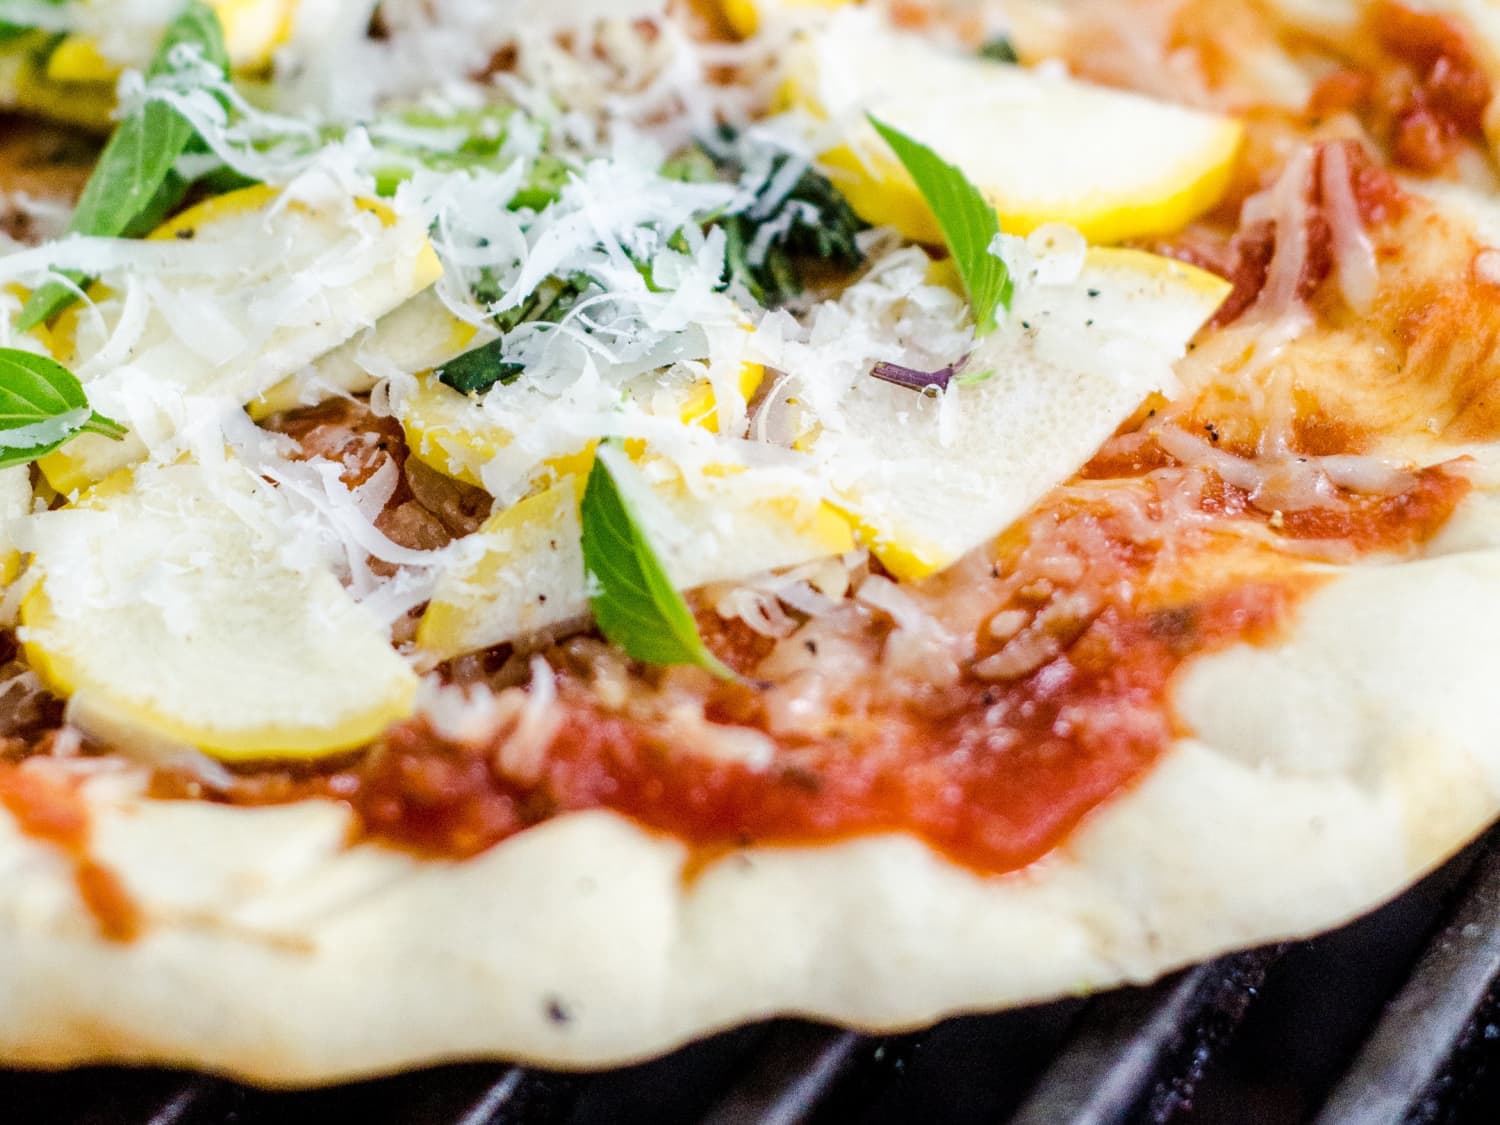 I Spent 8 Years Perfecting Homemade Pizza—Here's My Foolproof